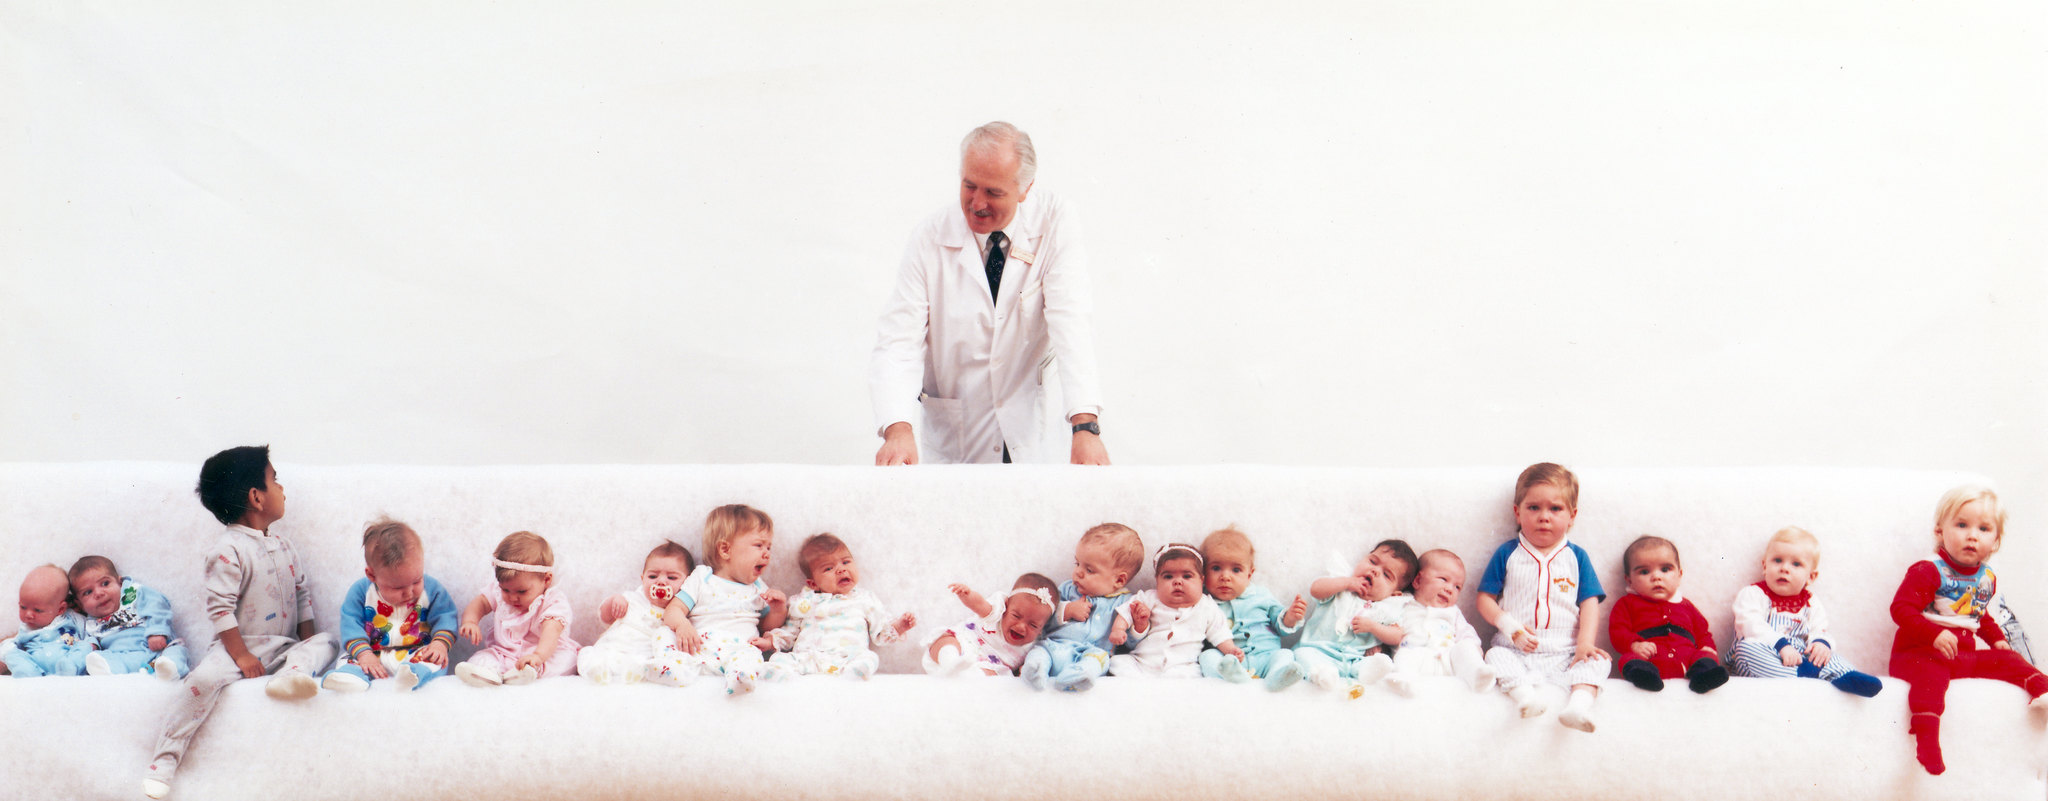 Leonard Bailey, MD, with some of the children who have benefited from his life-saving heart-transplant surgery. This photo was taken in March of 1989.